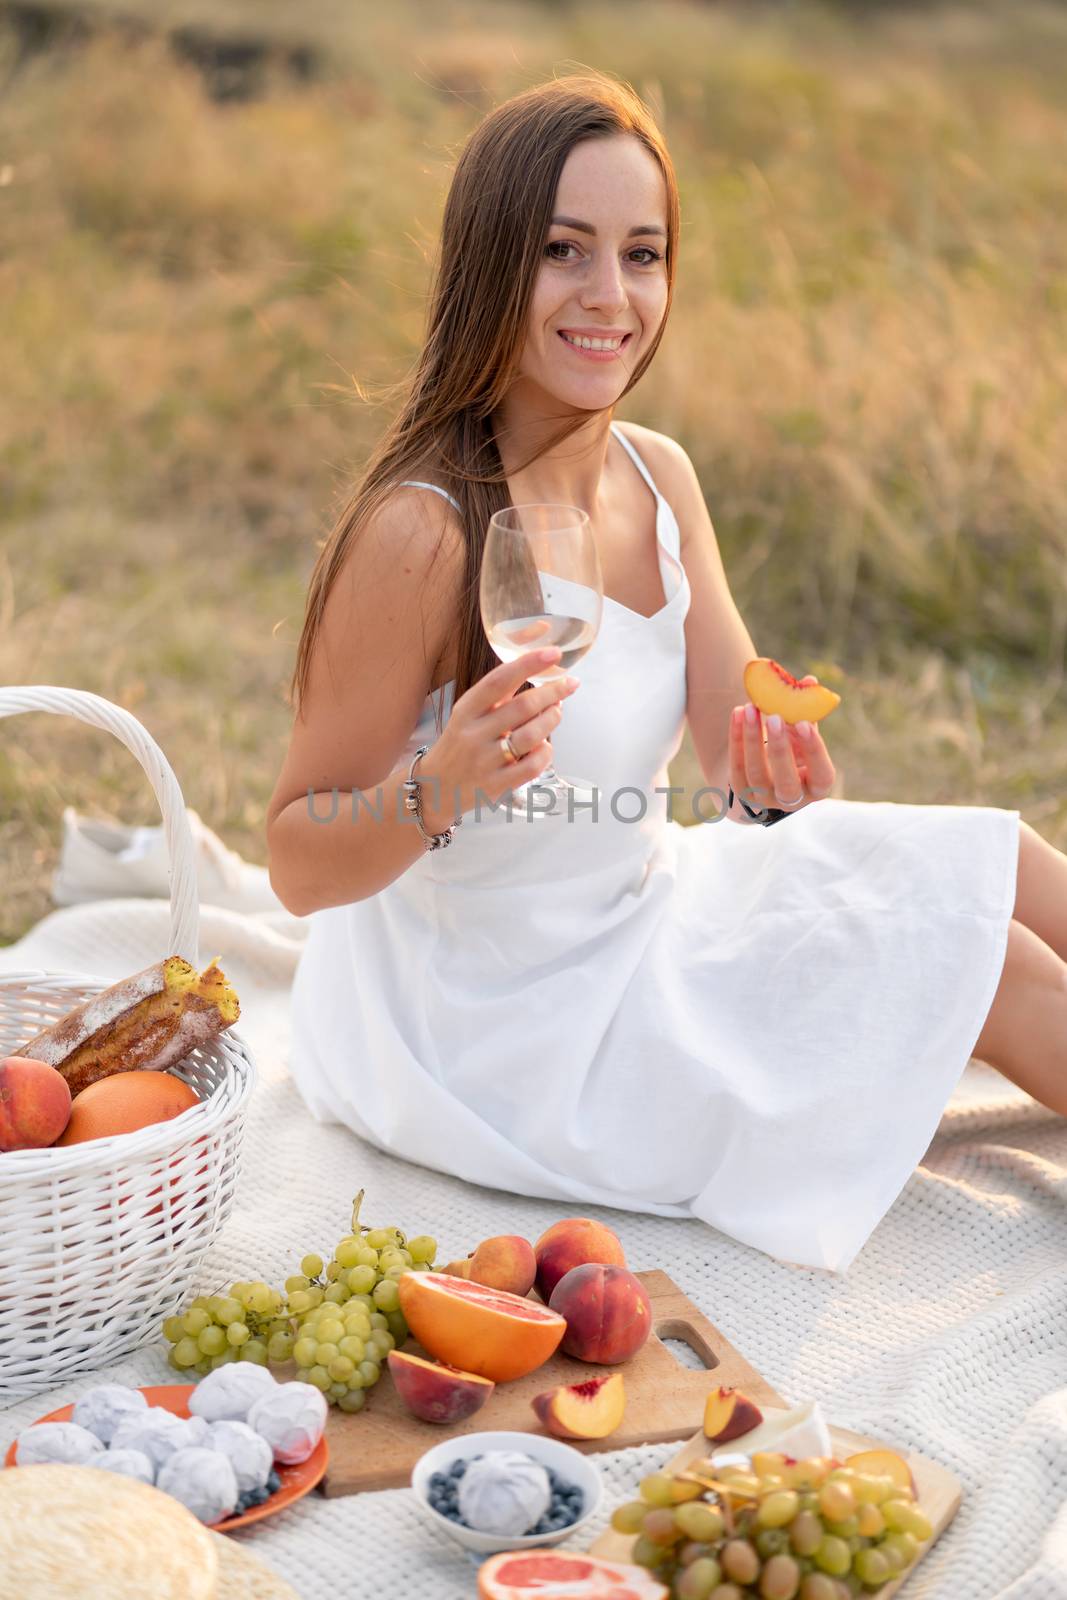 Gorgeous young brunette girl in a white sundress enjoying a picnic in a picturesque place. Romantic picnic.